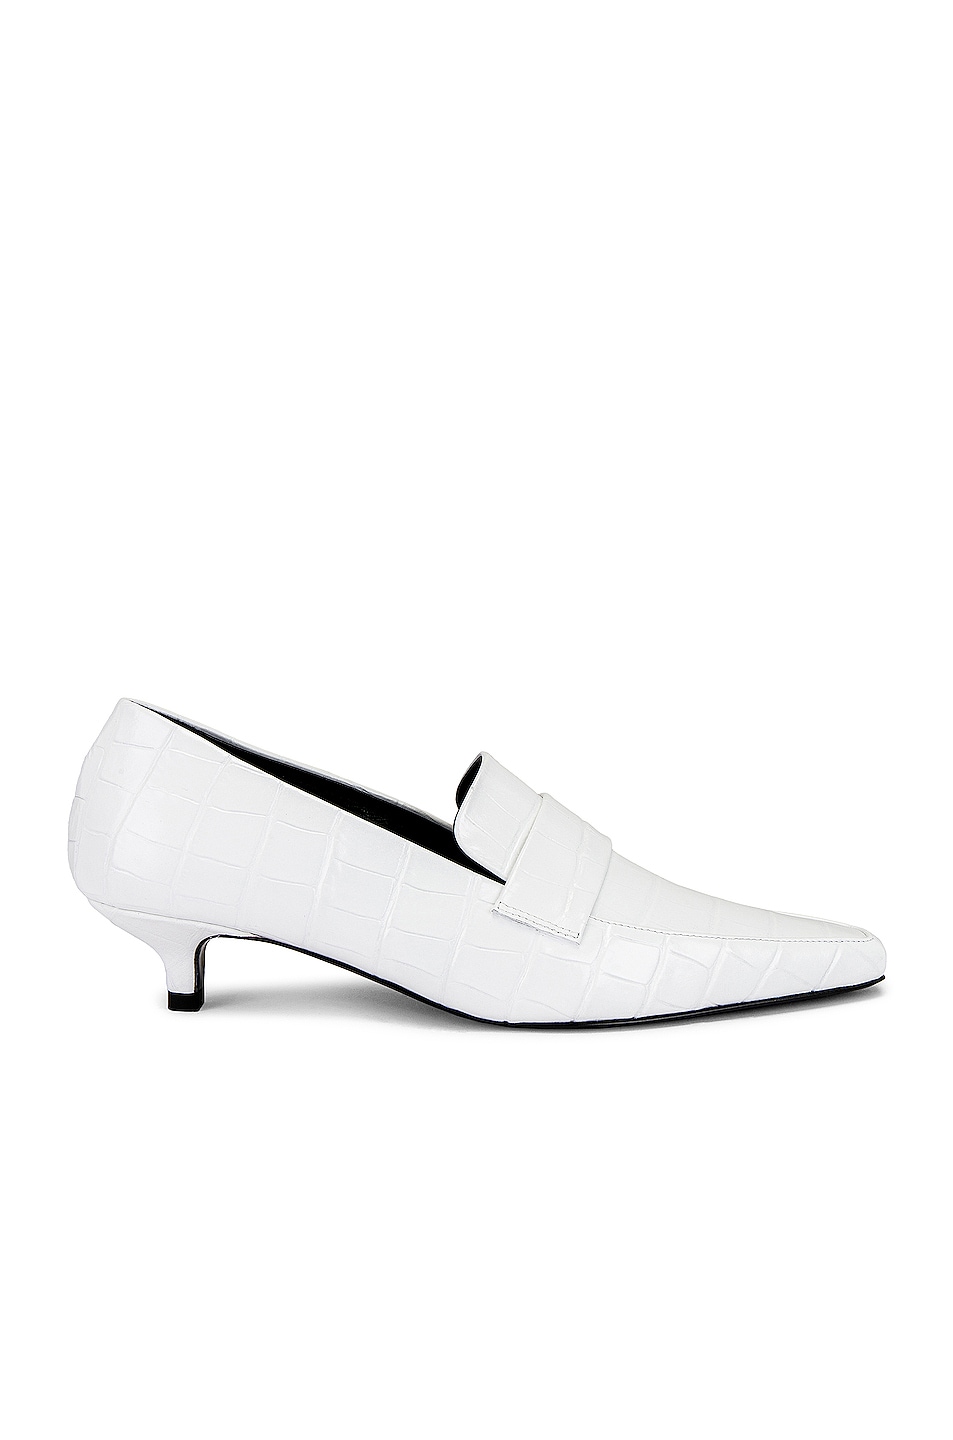 Image 1 of Toteme The Kitten Loafer Heel in White Croco